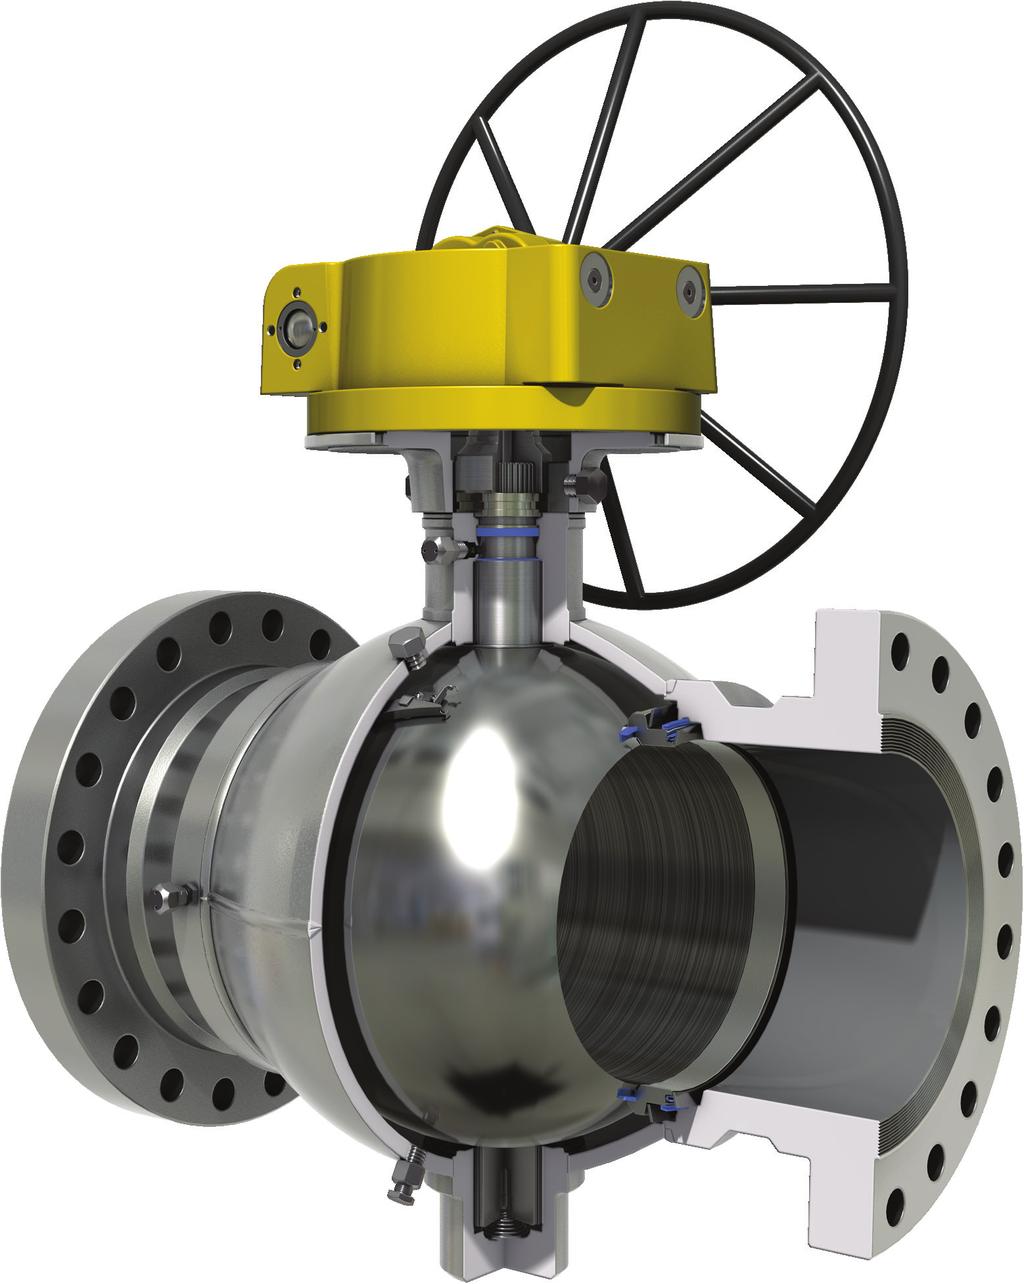 CAMERON T31MAX High-efficiency Fully Welded Ball Valve As one of the most trusted valves in the petroleum industry, the CAMERON T31MAX provides the strength of forged components with a lightweight